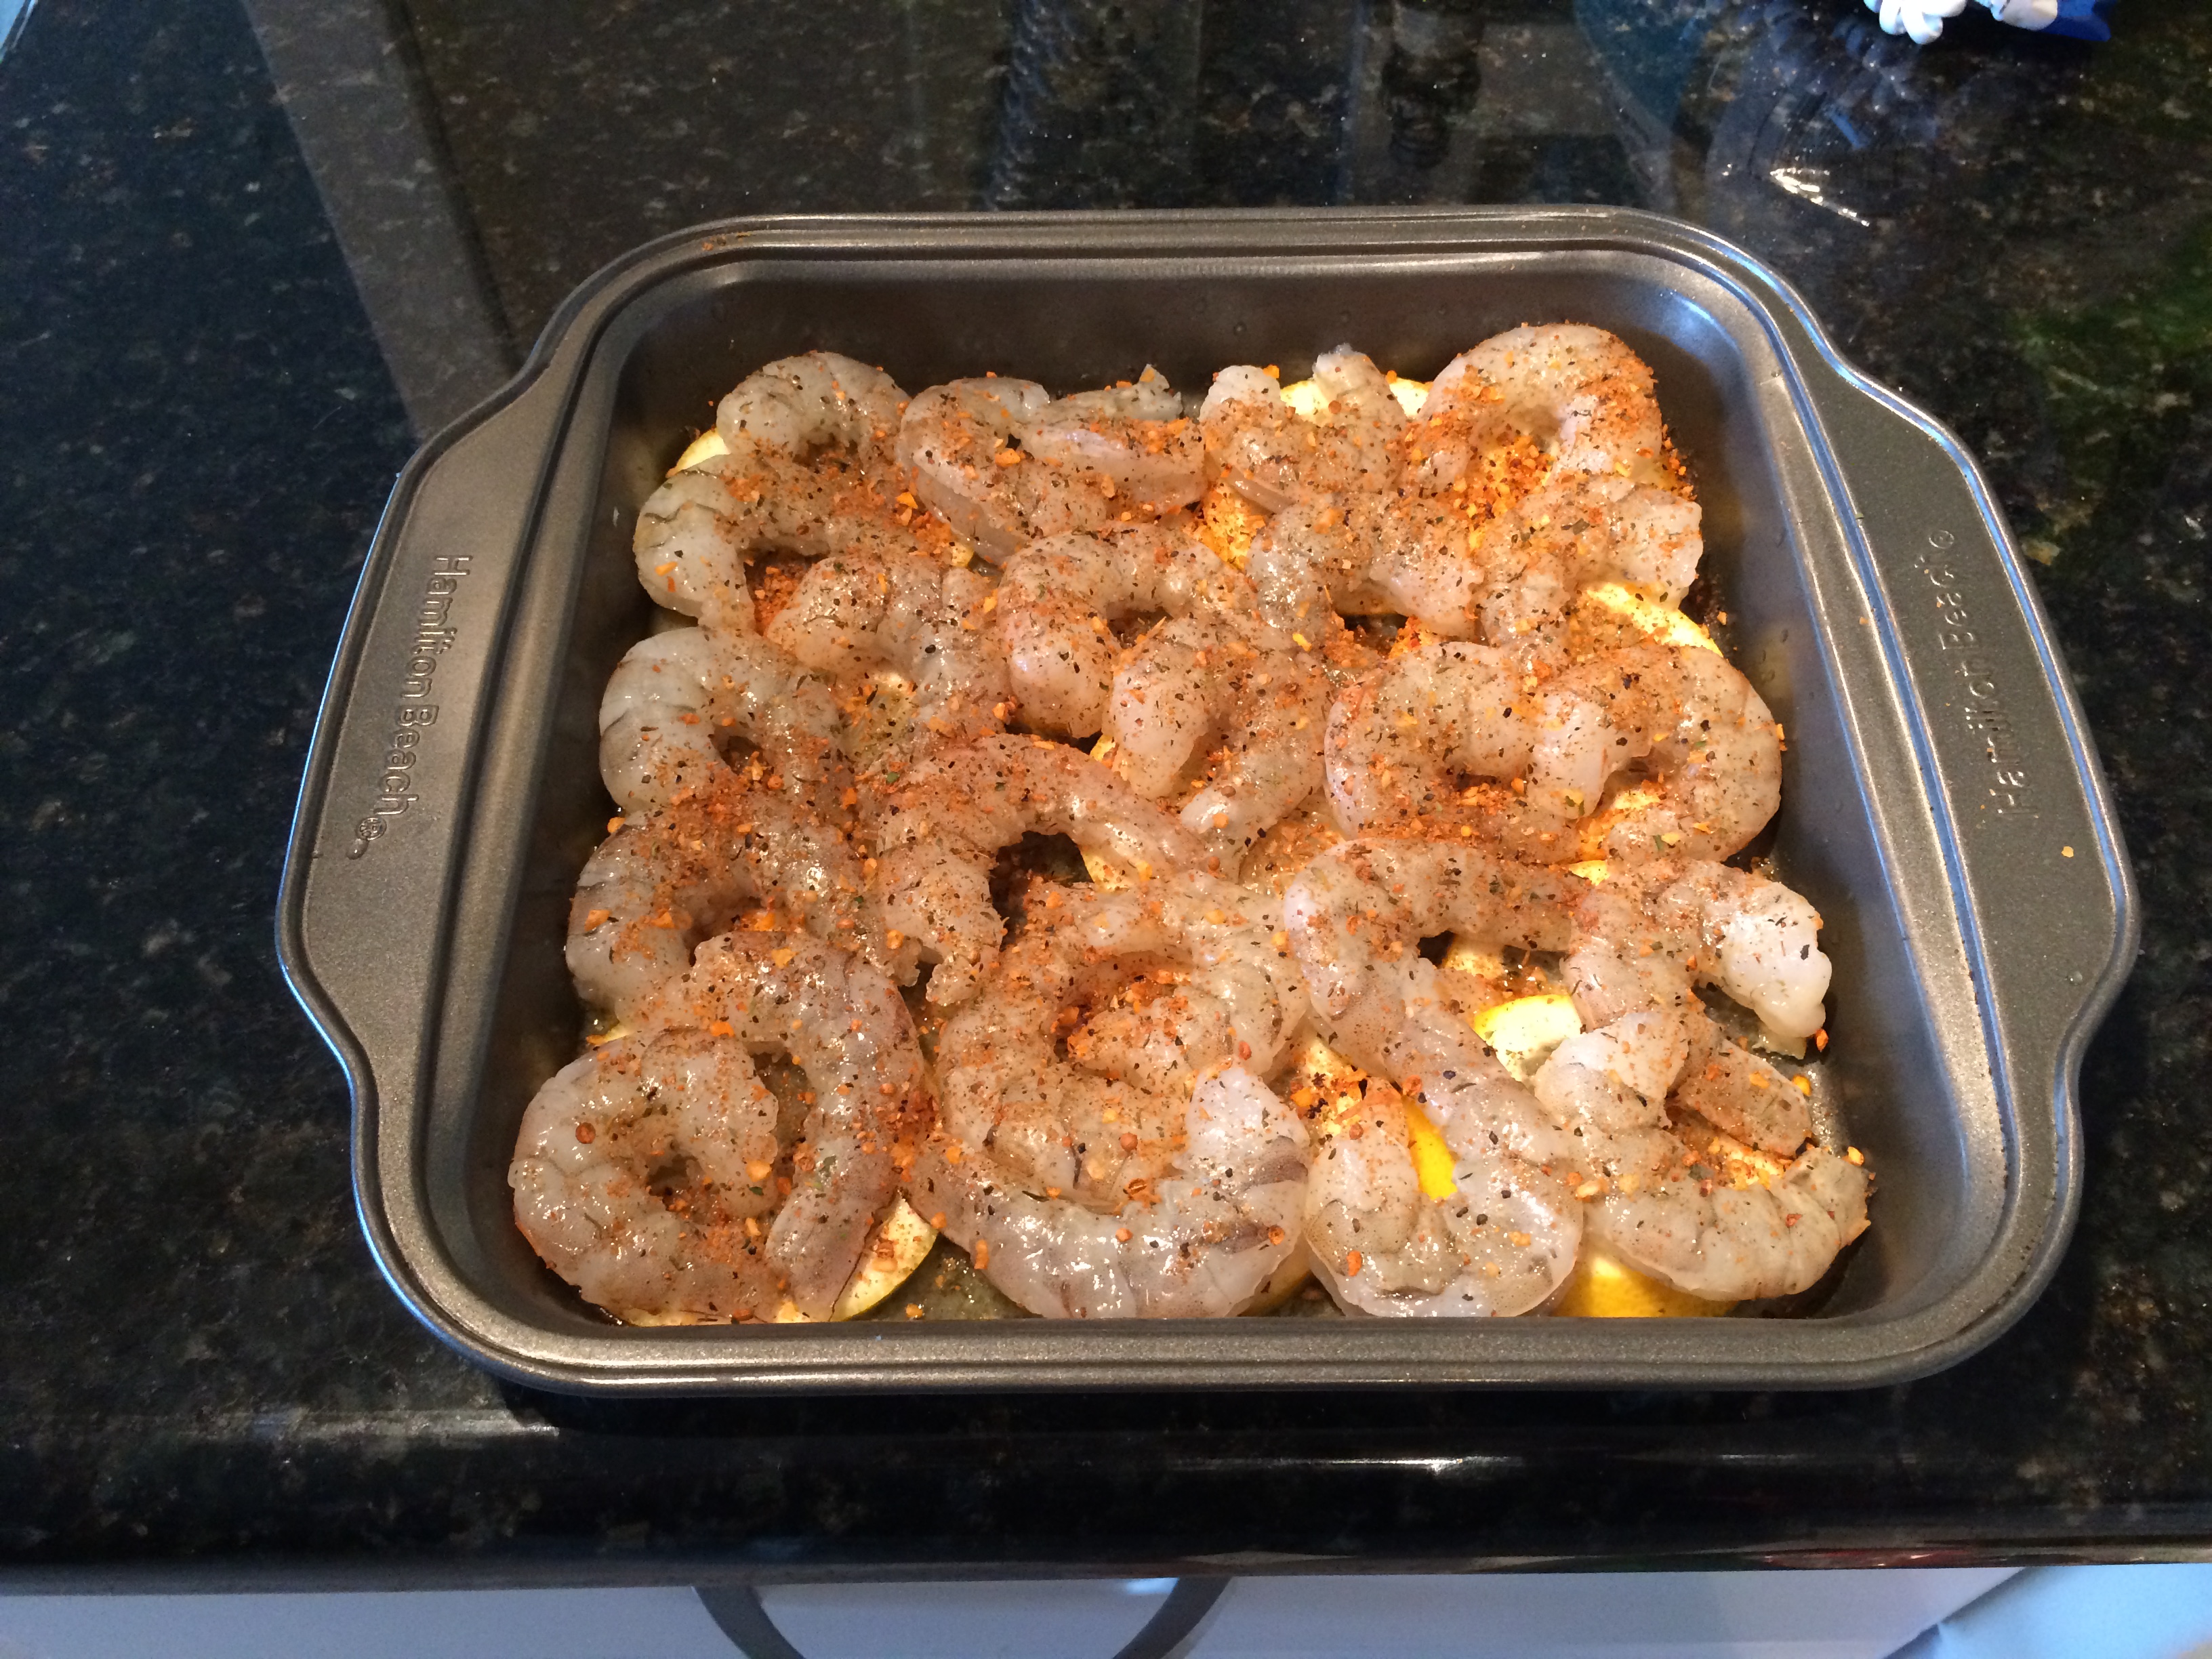 Prepped shrimp ready to go in the oven.